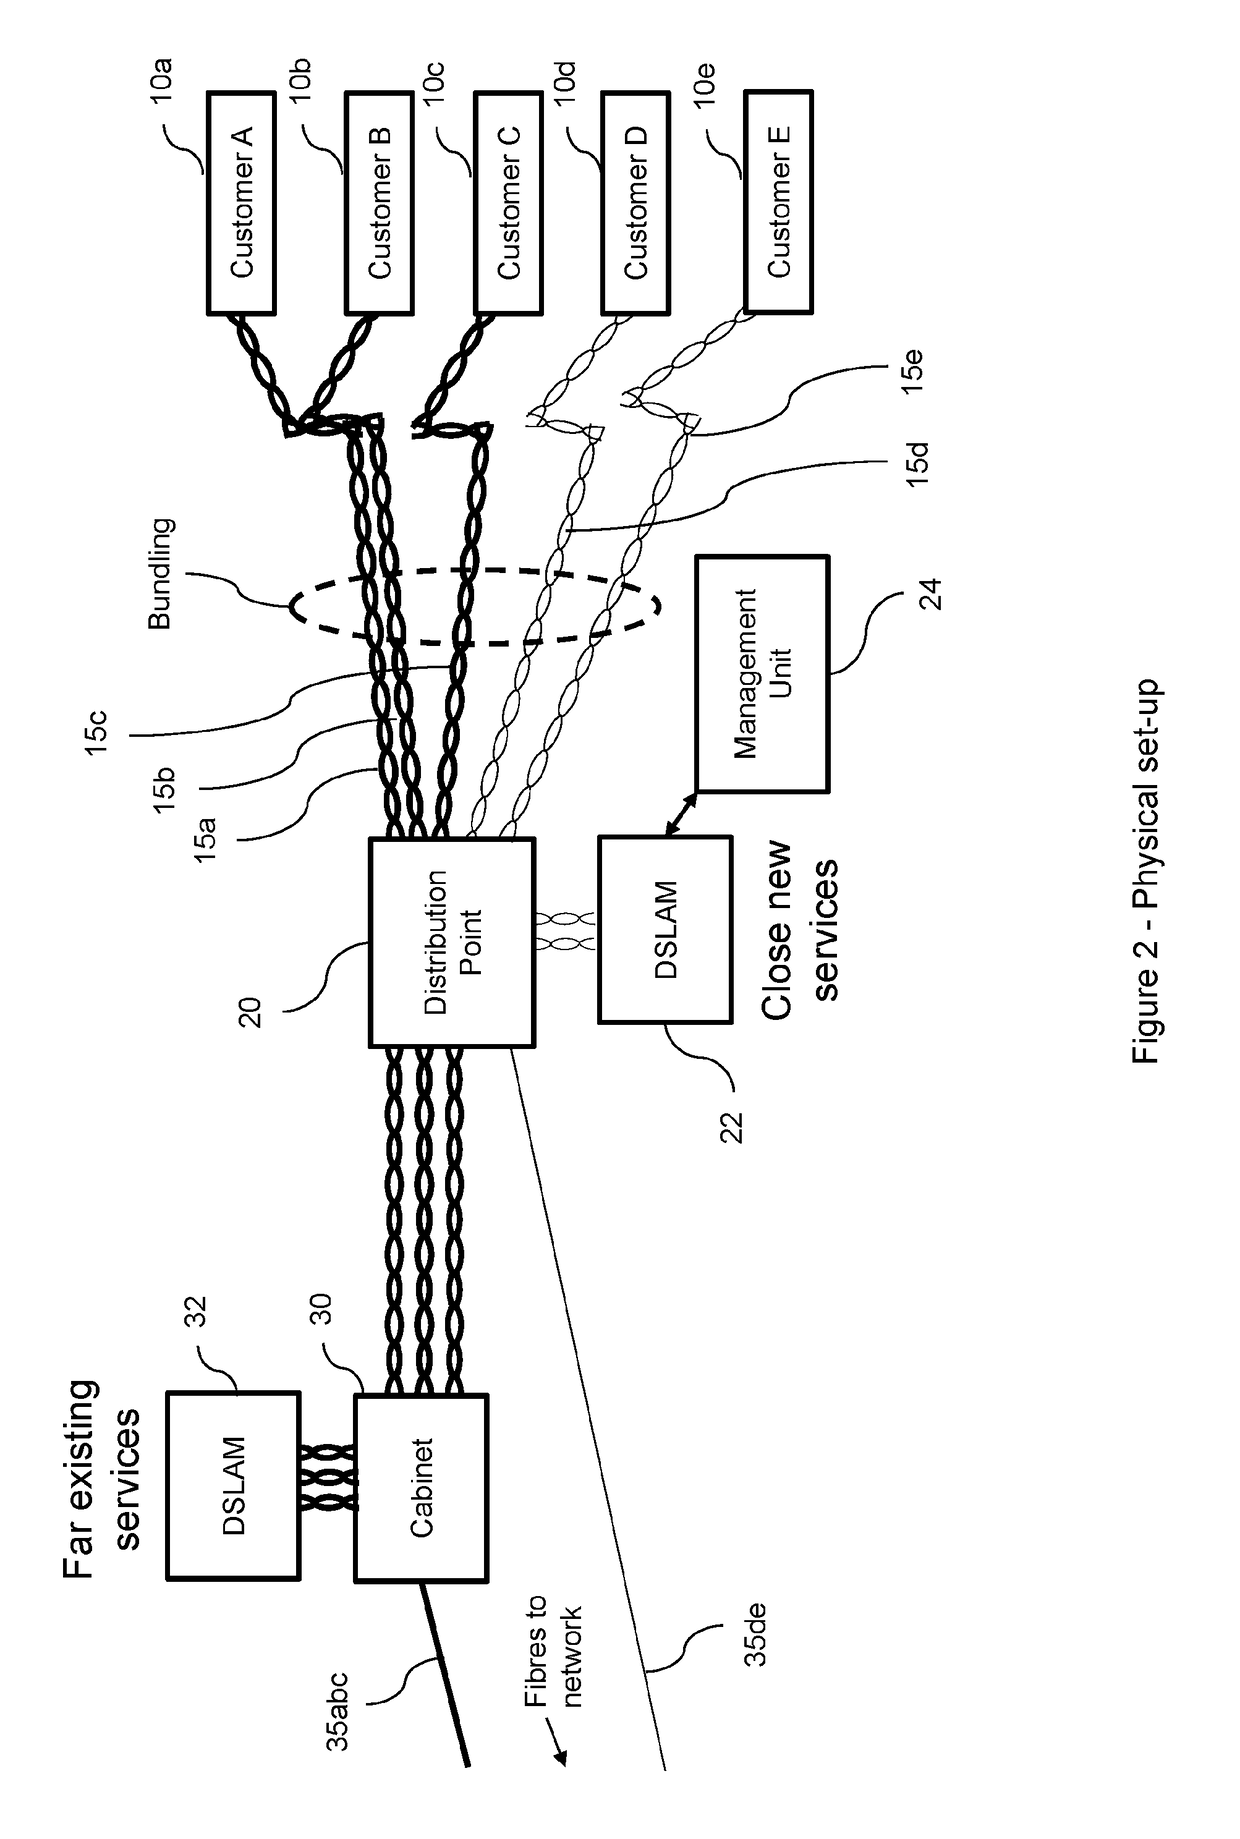 Resource allocation in a digital communication network